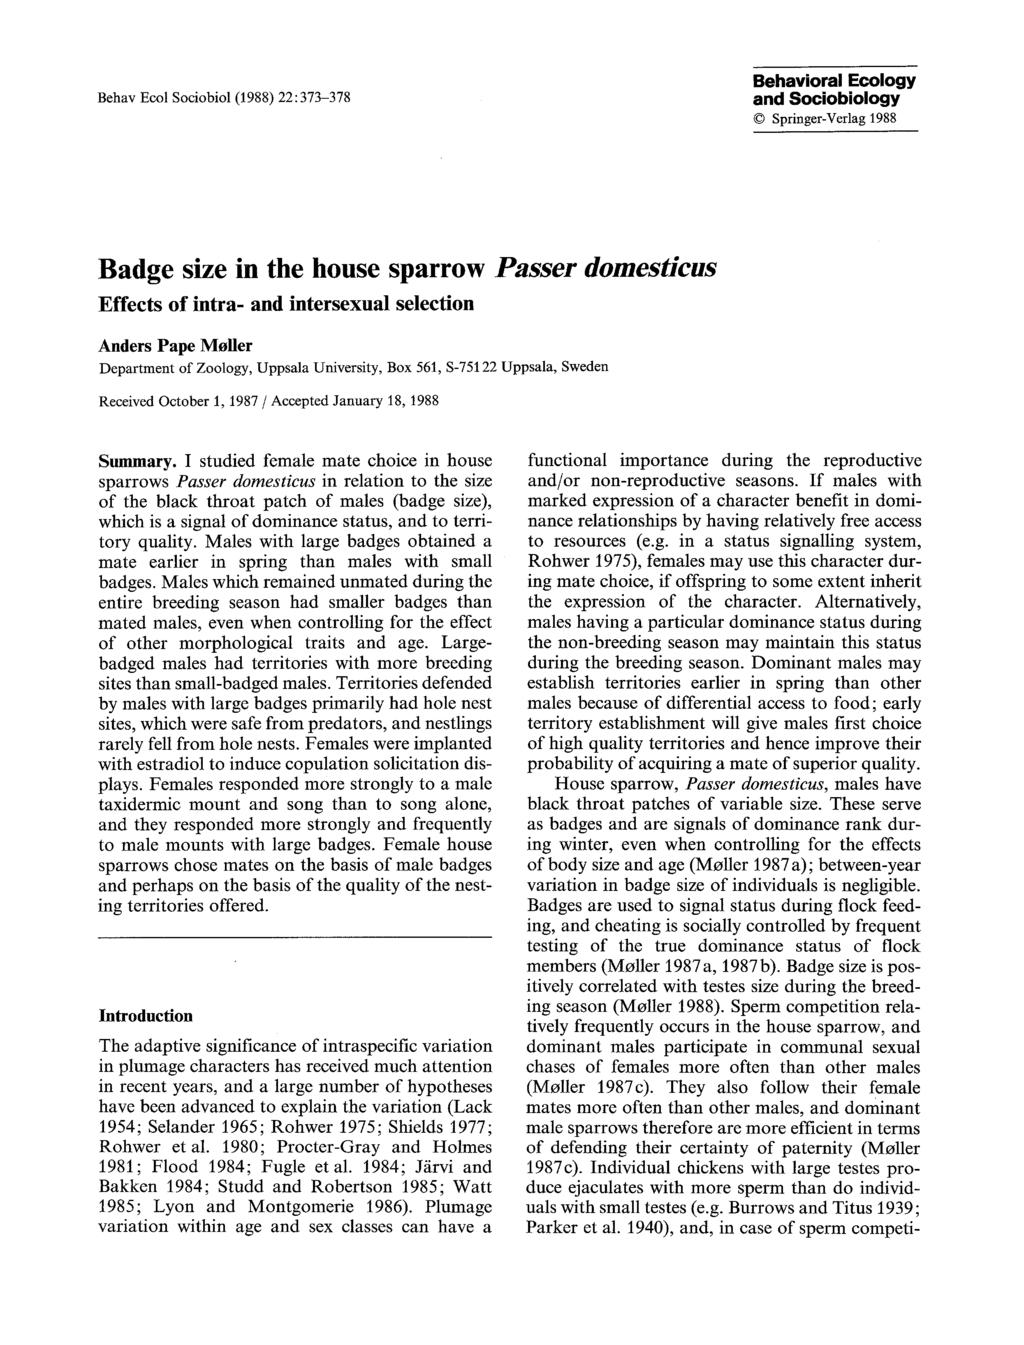 Behav Ecol Sociobiol (1988) 22:373-378 Behavioral Ecology and Sociobiology 9 Springer-Verlag 1988 Badge size in the house sparrow Passer domesticus Effects of intra- and intersexual selection Anders